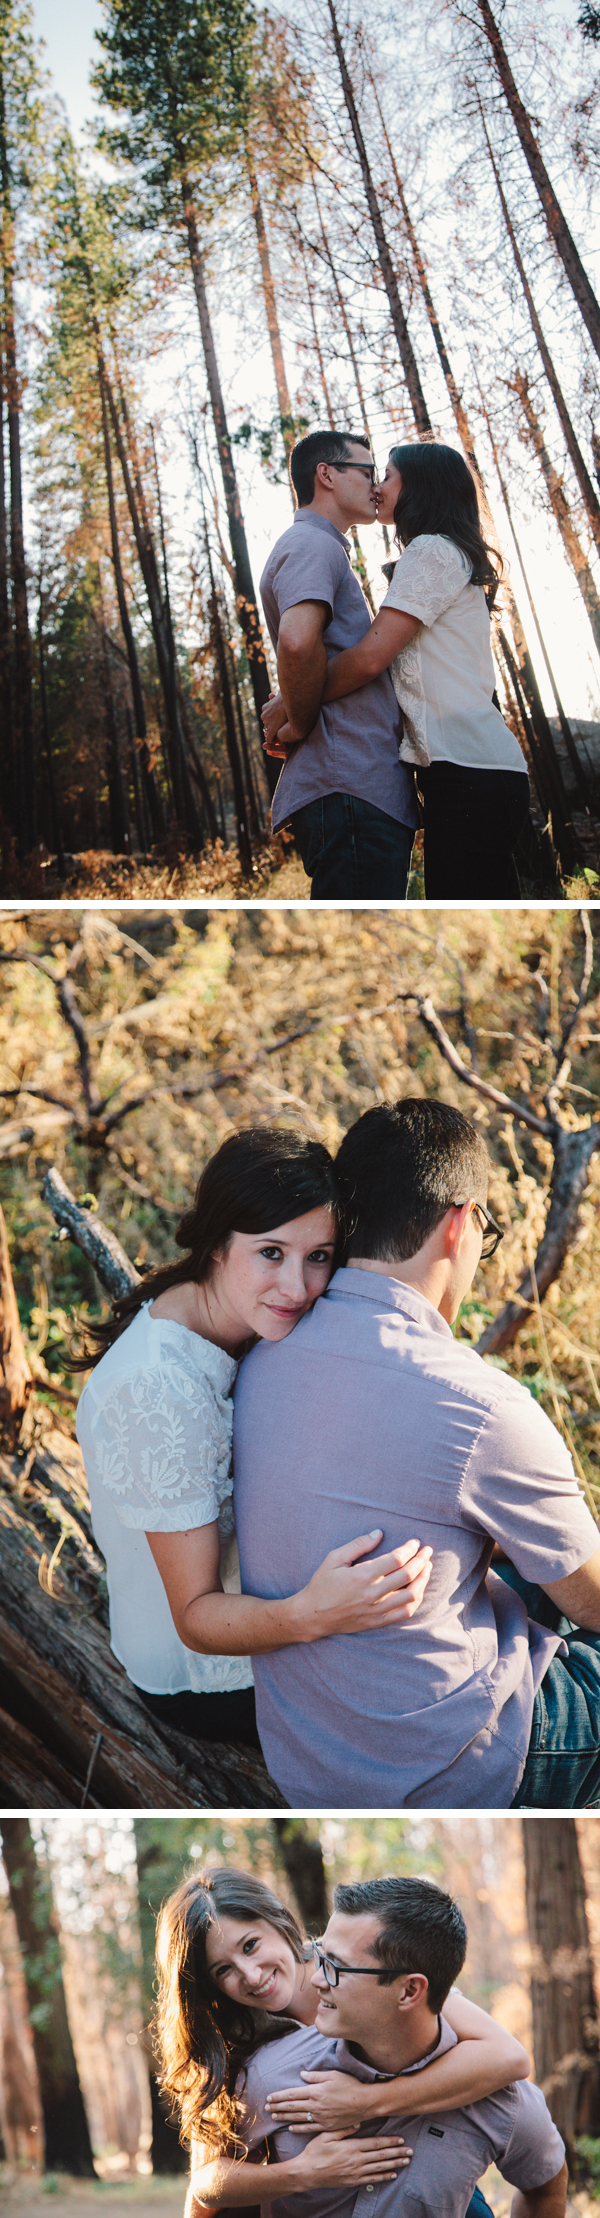 Engagement photography in the woods • Yosemite, California